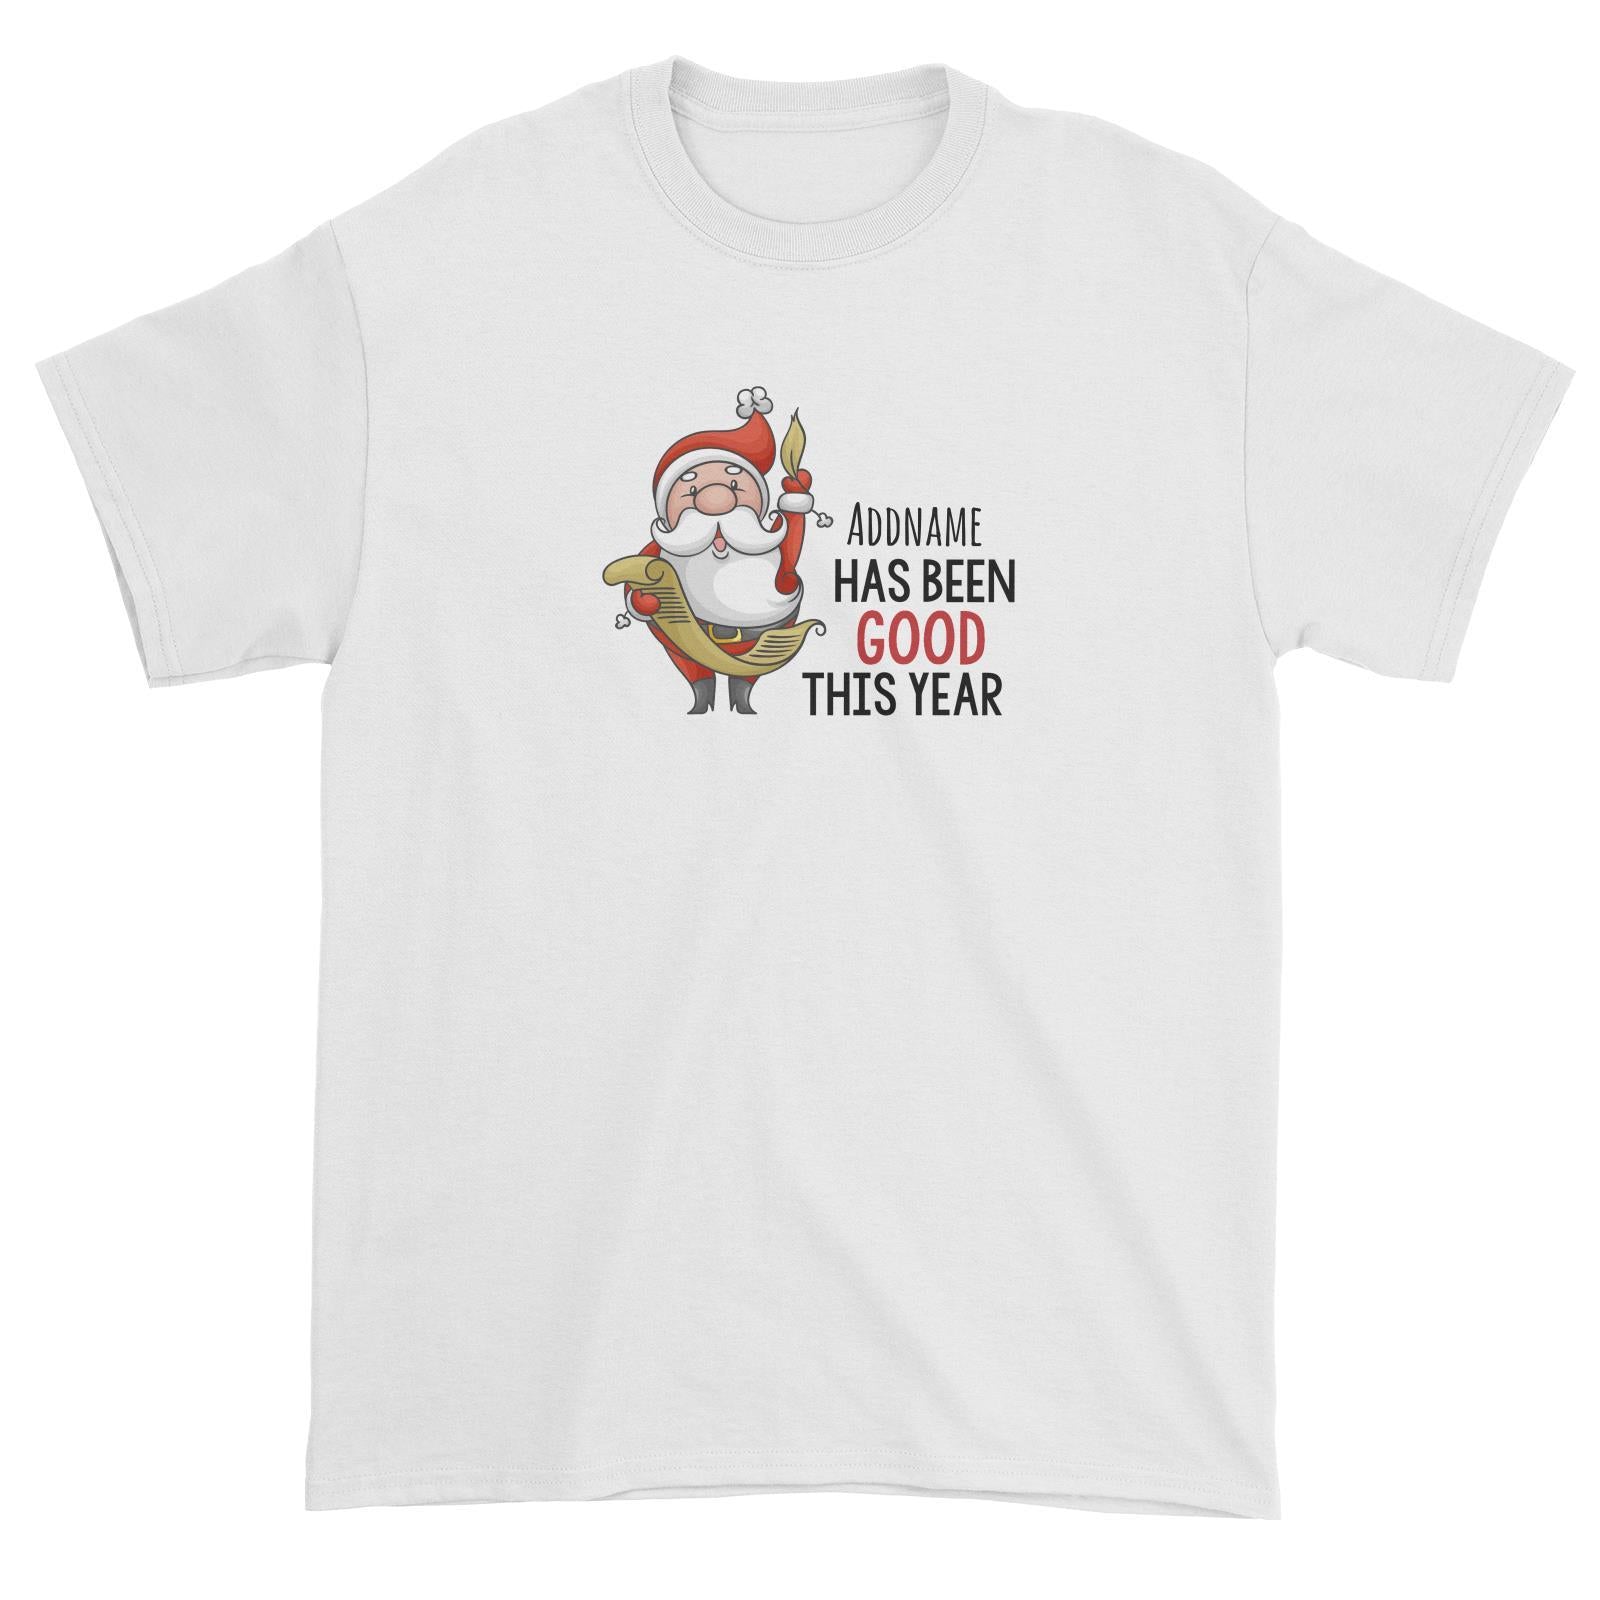 Santa Says Addname Has Been Good This Year Unisex T-Shirt Christmas Matching Family Personalizable Designs Cute